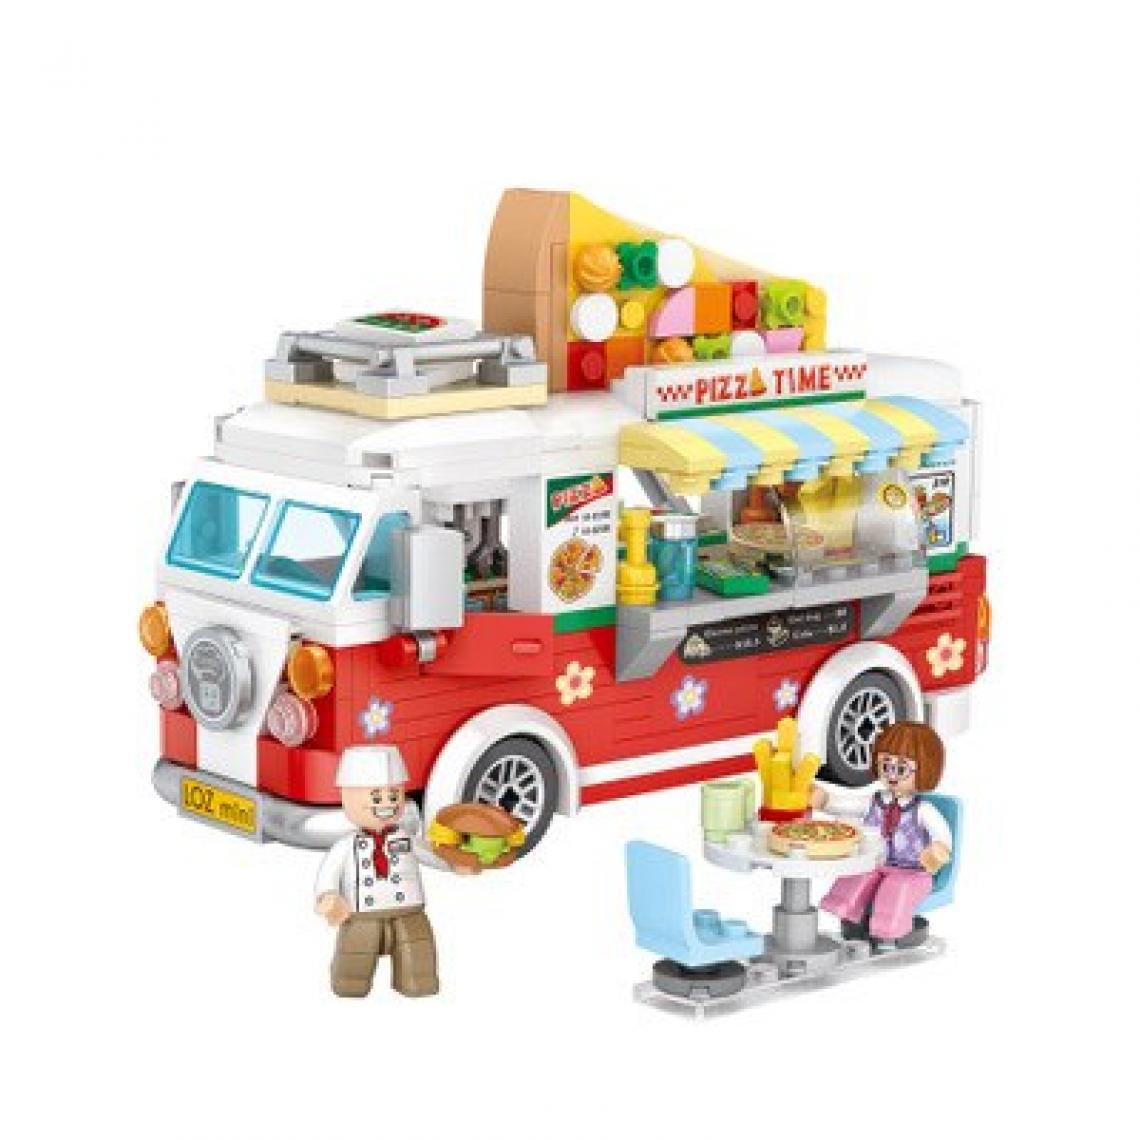 Universal - Mini Blocs City Series Street View Truck Fruit/Ice Cream Shop Learning Toys(Rouge) - Voitures